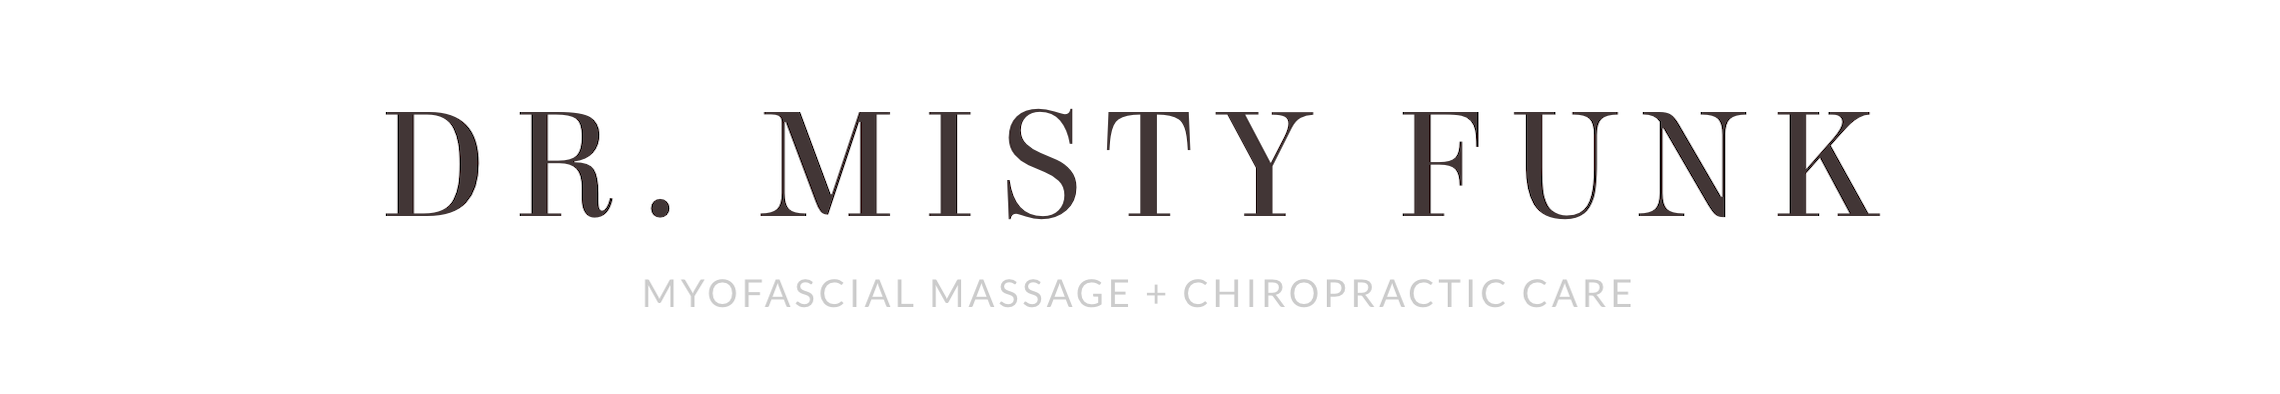 Myofascial Massage + Chiropractic Care | Dr. Misty Funk, DC